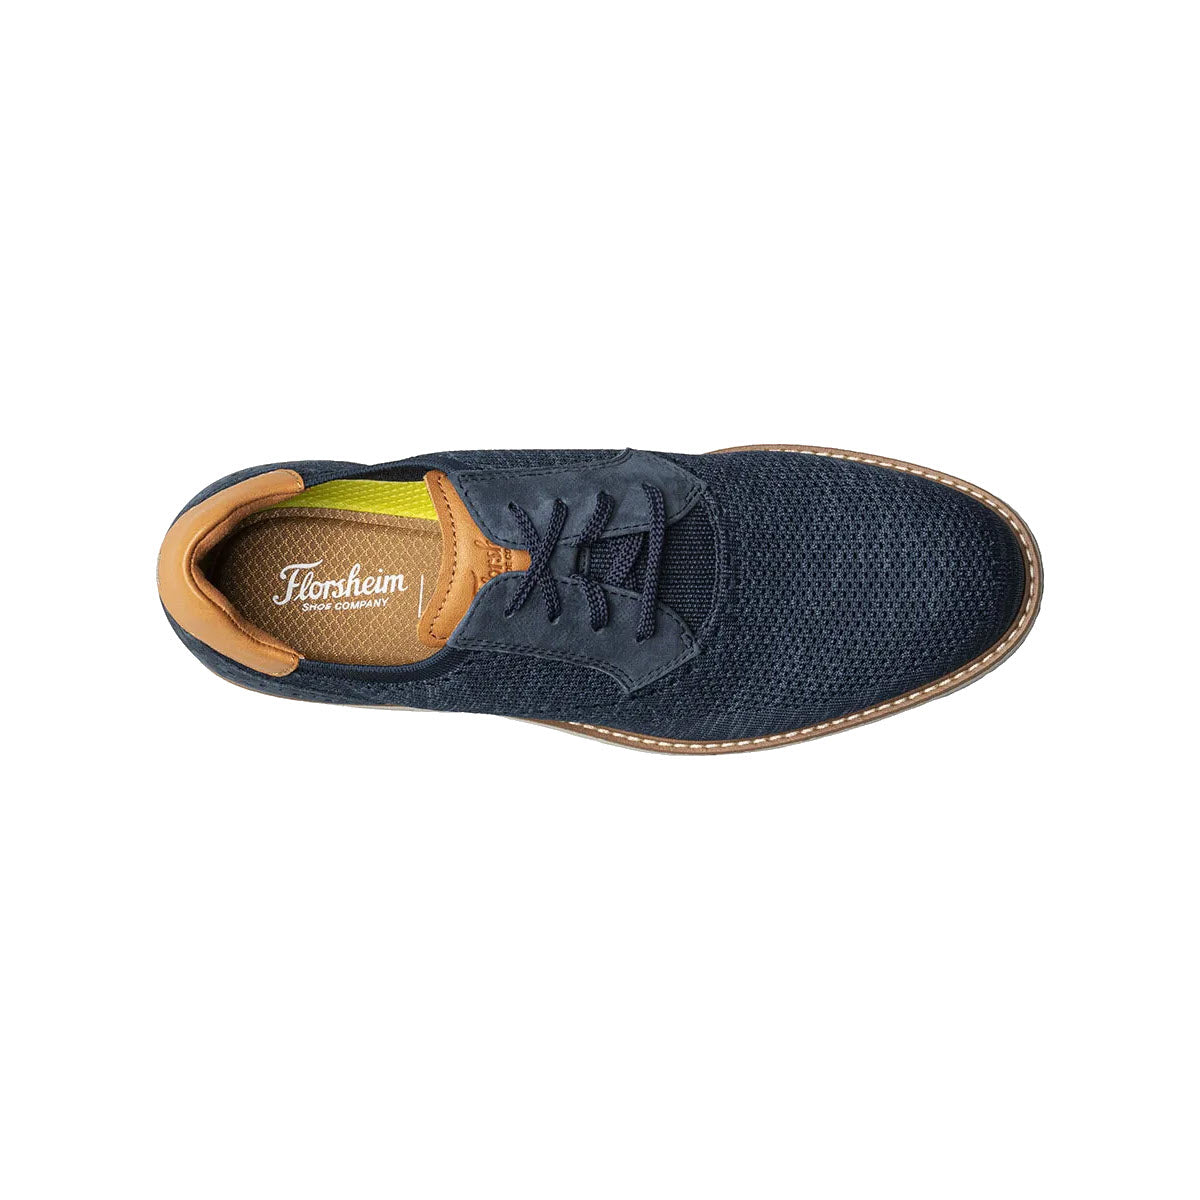 Top view of a dark blue Florsheim Vibe Knit Plain Toe Oxford Navy men&#39;s dress shoe with tan interior and laced up front featuring a Comfortech footbed.